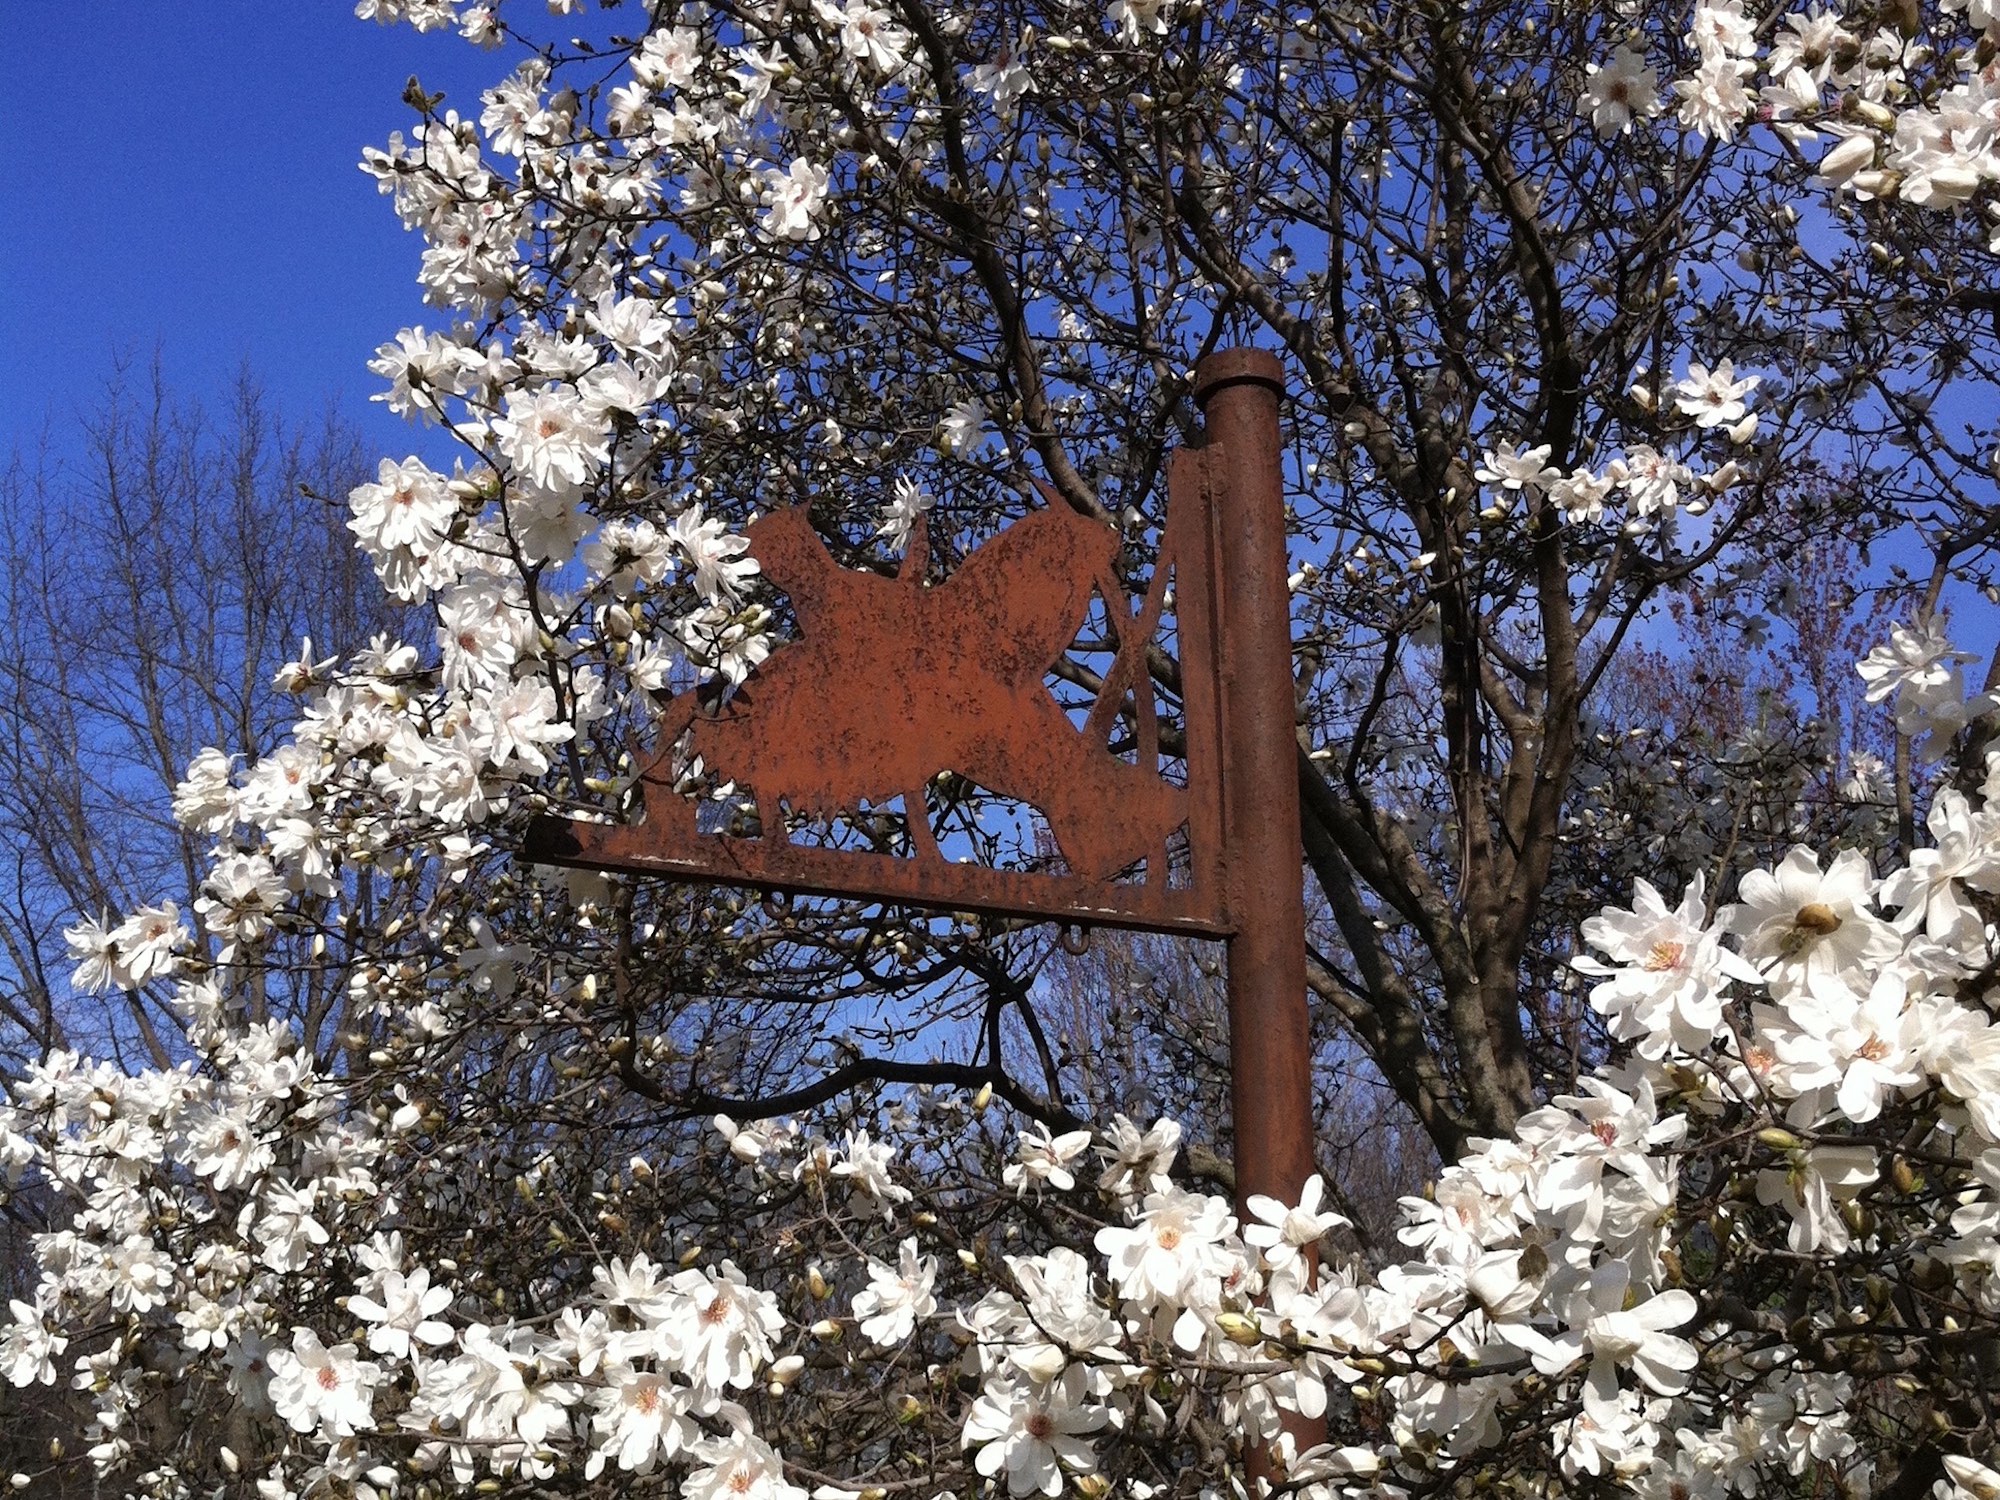 Metal cutout sign at the University of Wisconsin Arboretum in Madison, Wisconsin on April 18, 2015.